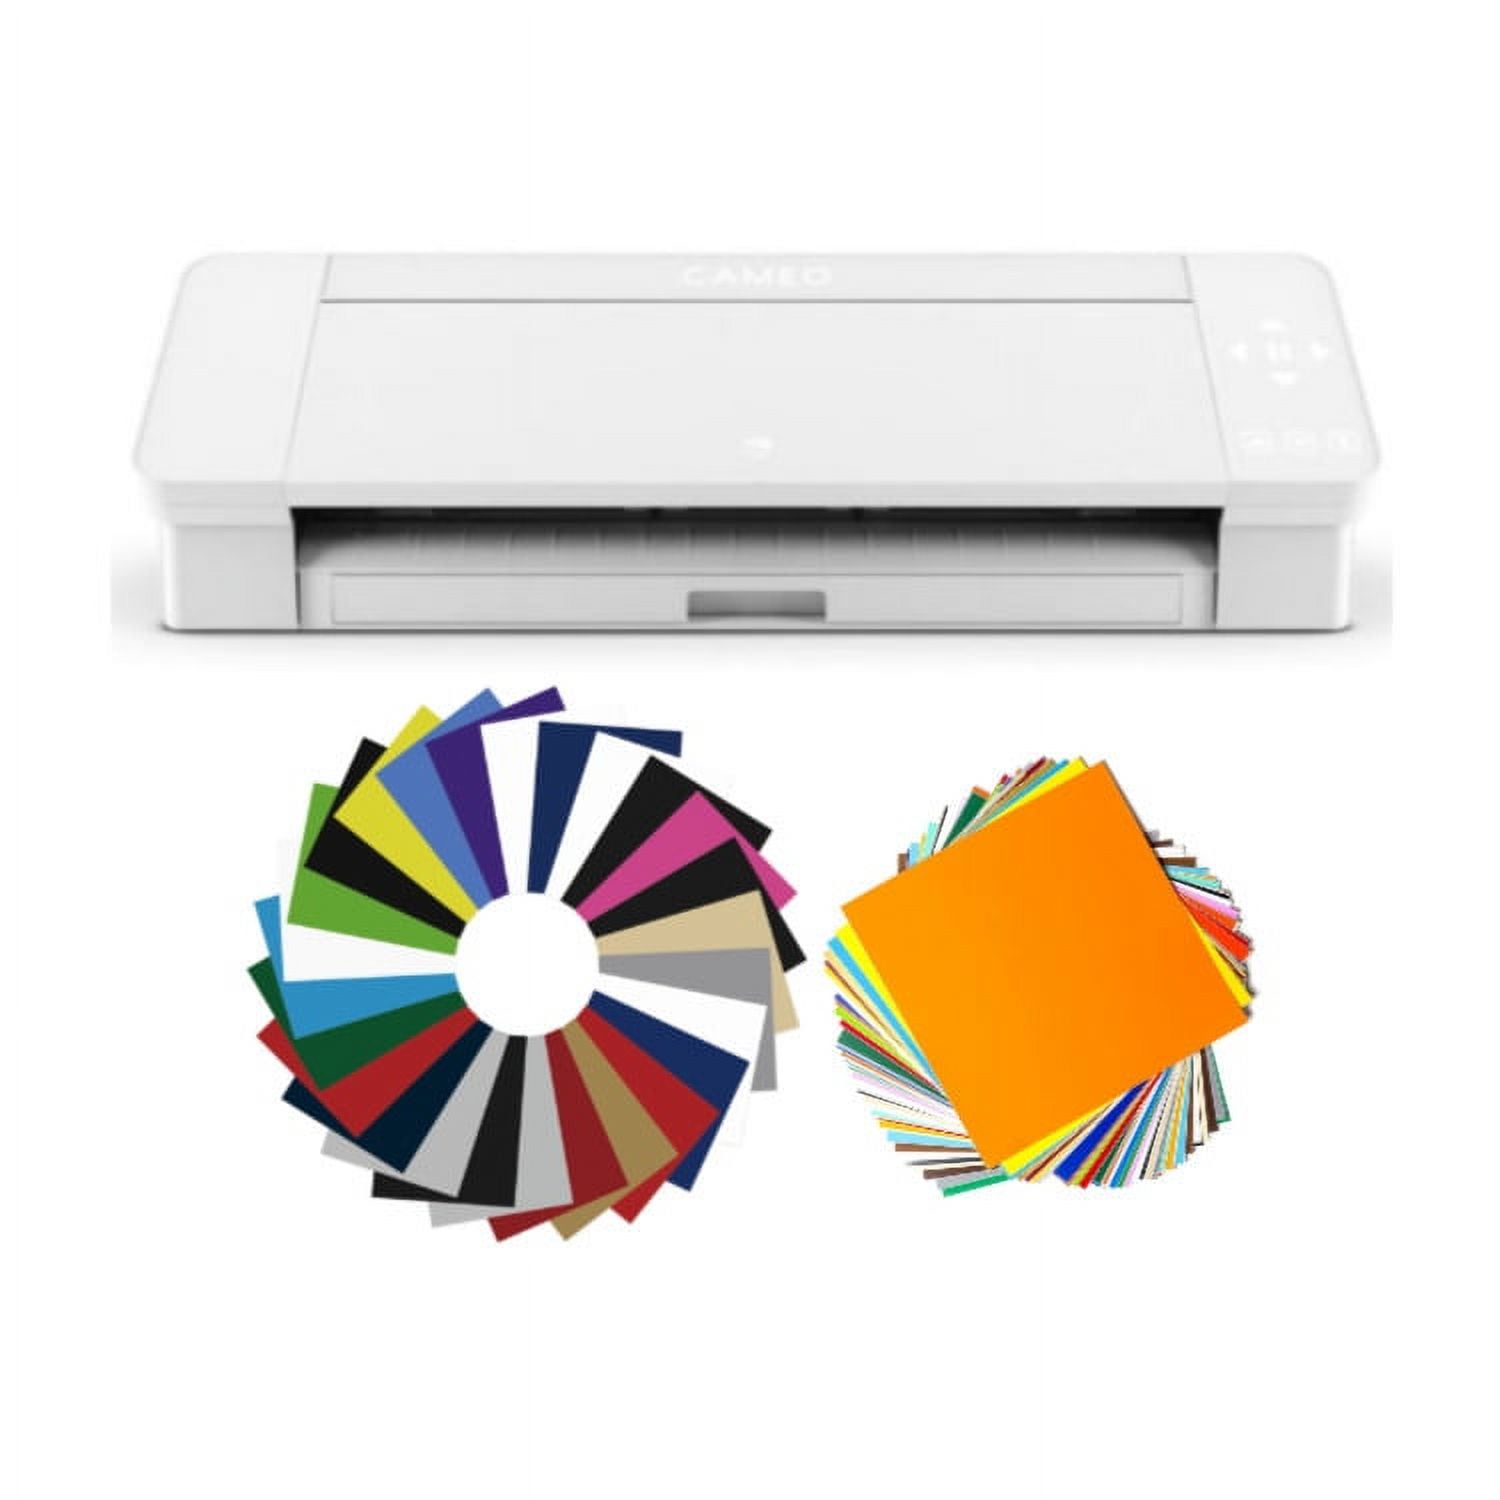 Silhouette Cameo 4 Desktop Cutting Machine (White) with Accessory